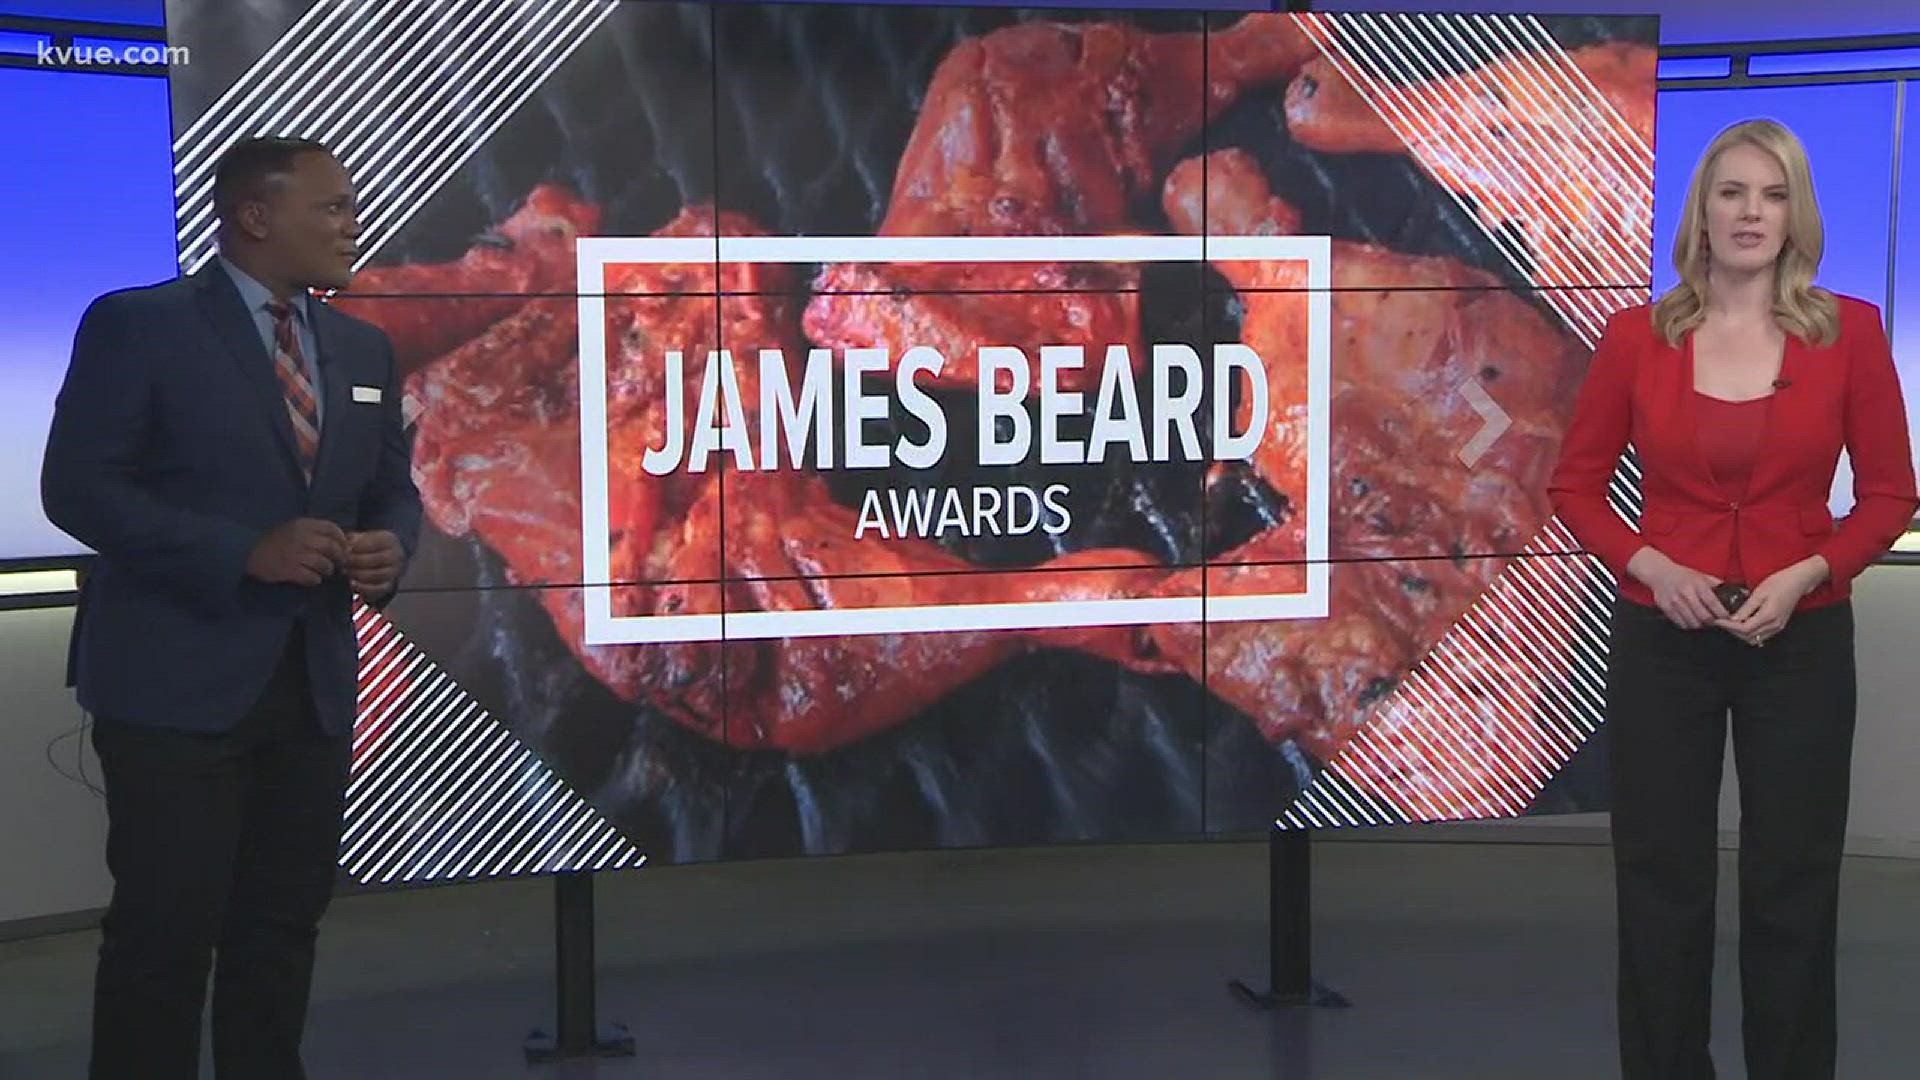 Austin is making it's mark on this year's James Beard Awards. A handful of restaurants, chefs and even a brewery owner are on the list of semifinalists.